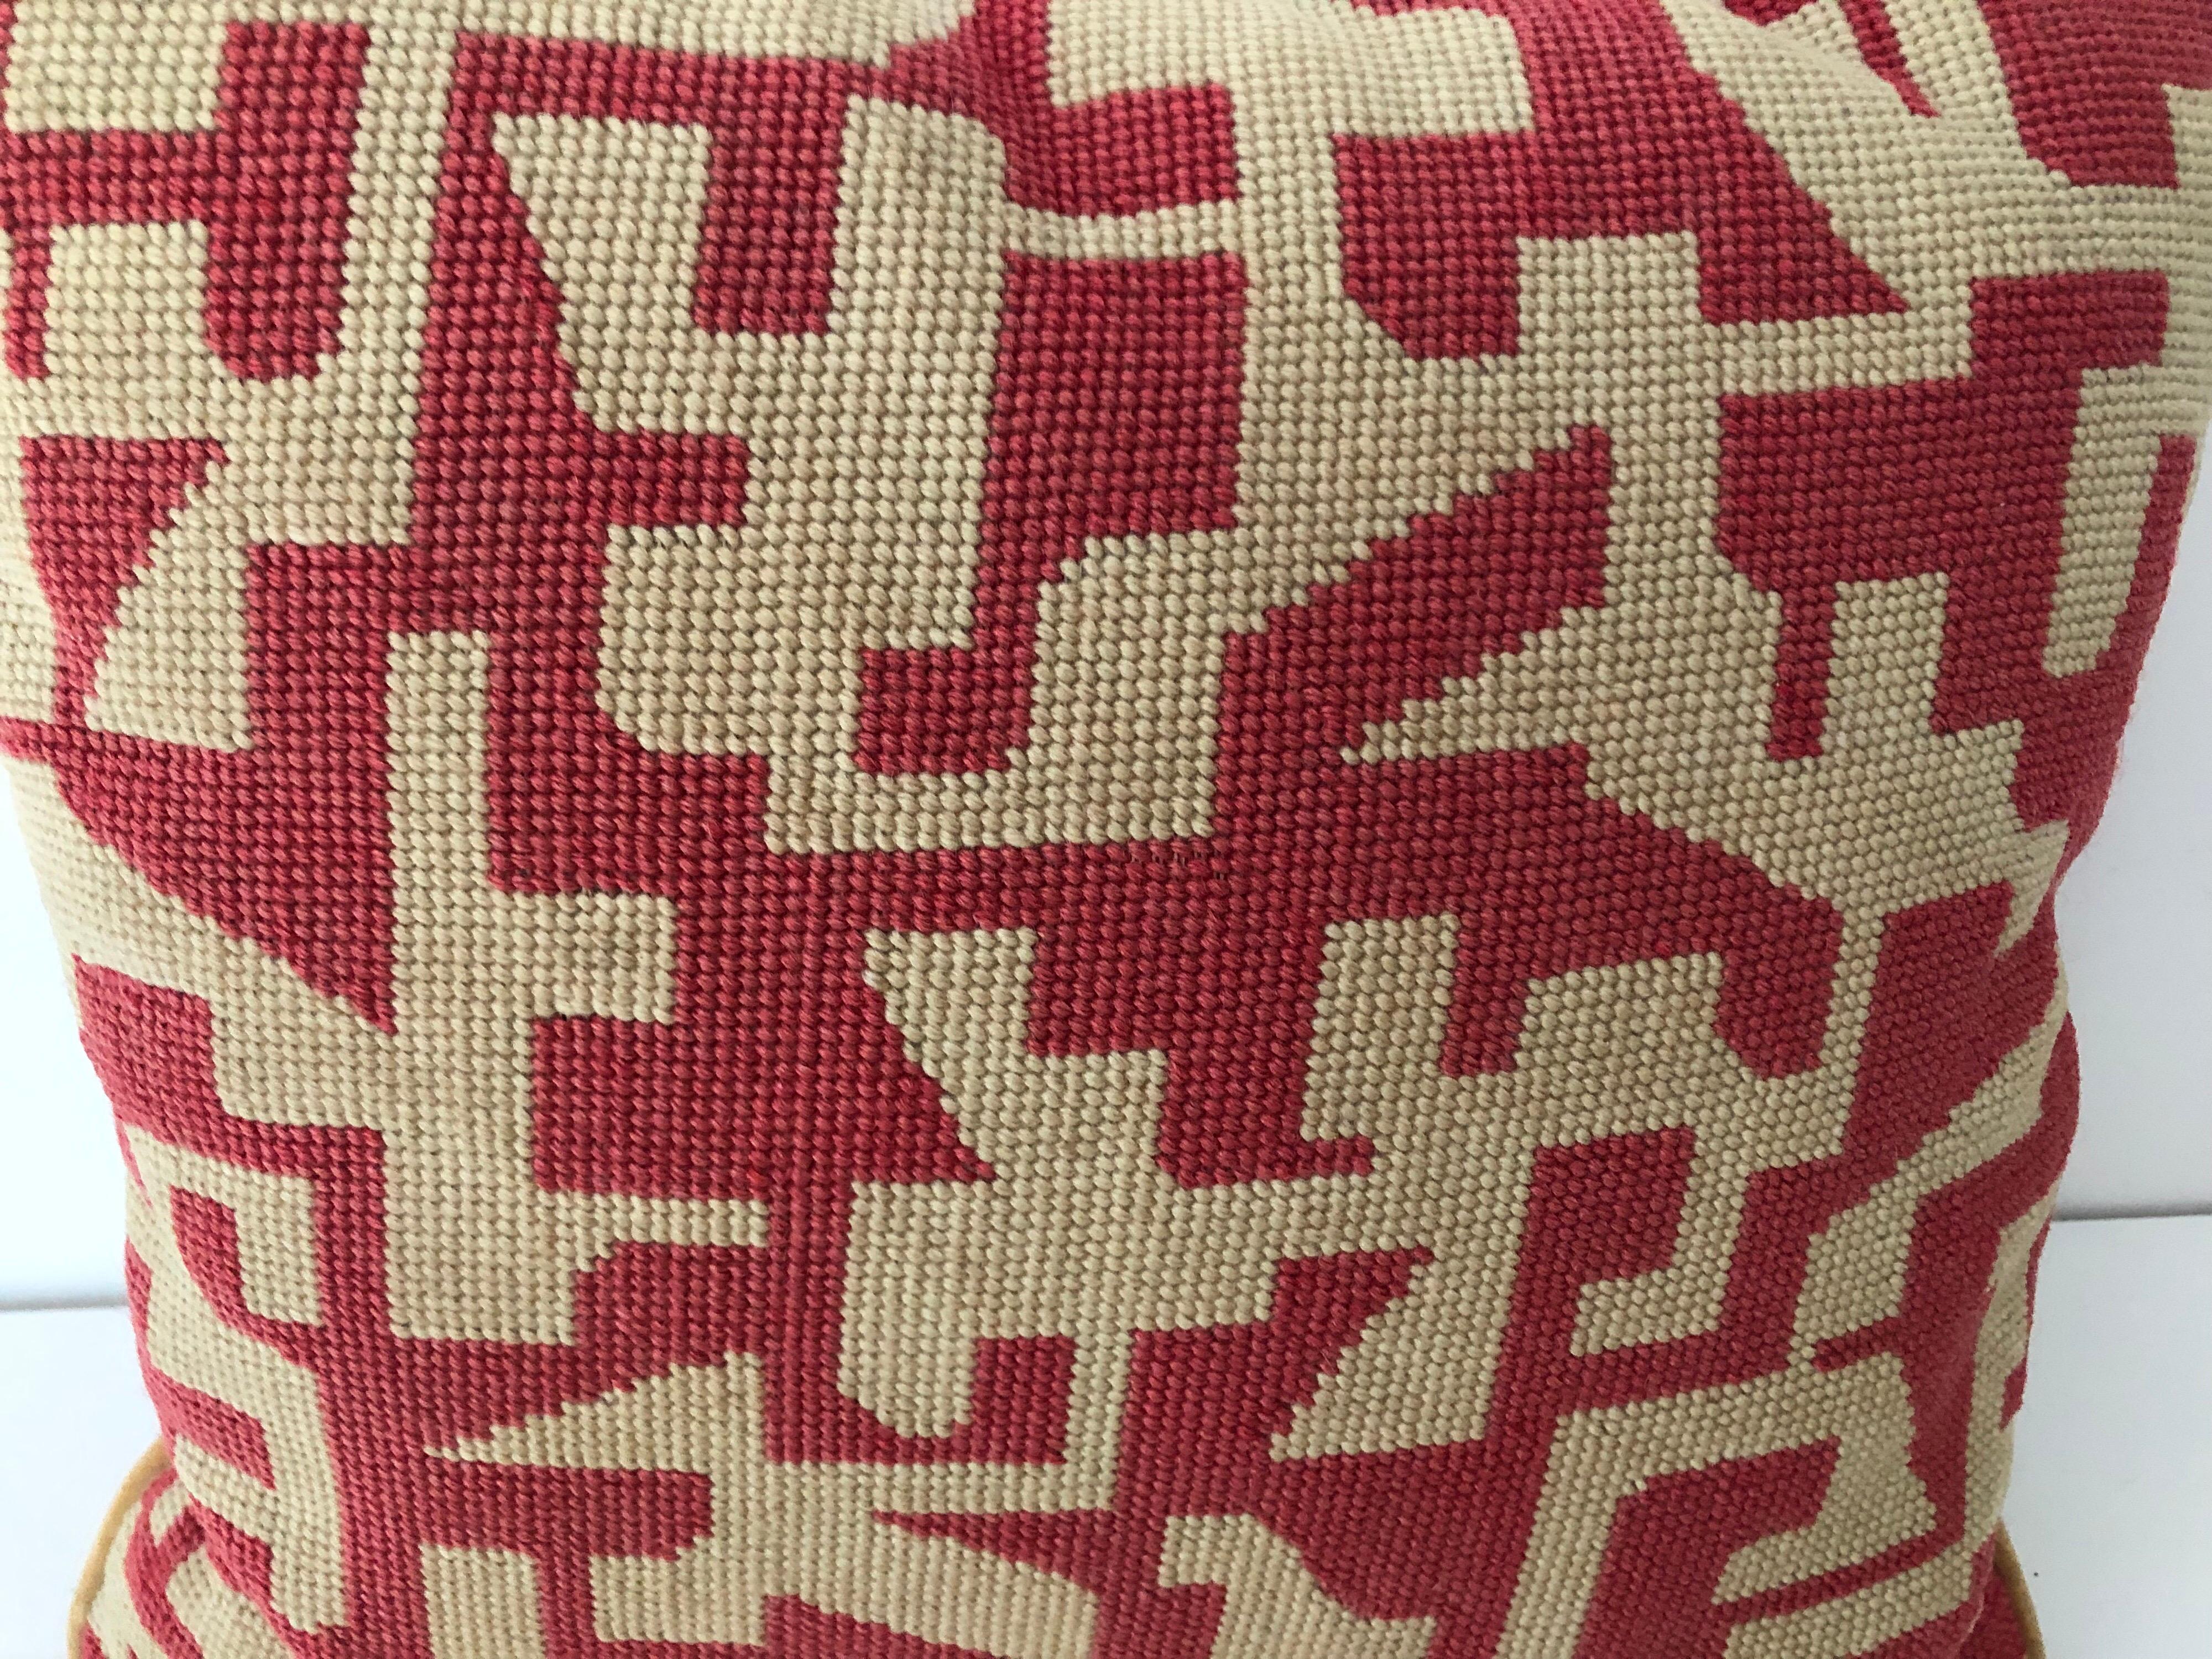 A handmade midcentury geometric needlepoint pillow with tan velvet back. Tones of deep pink/rose and off white. Two associated pillows also available.